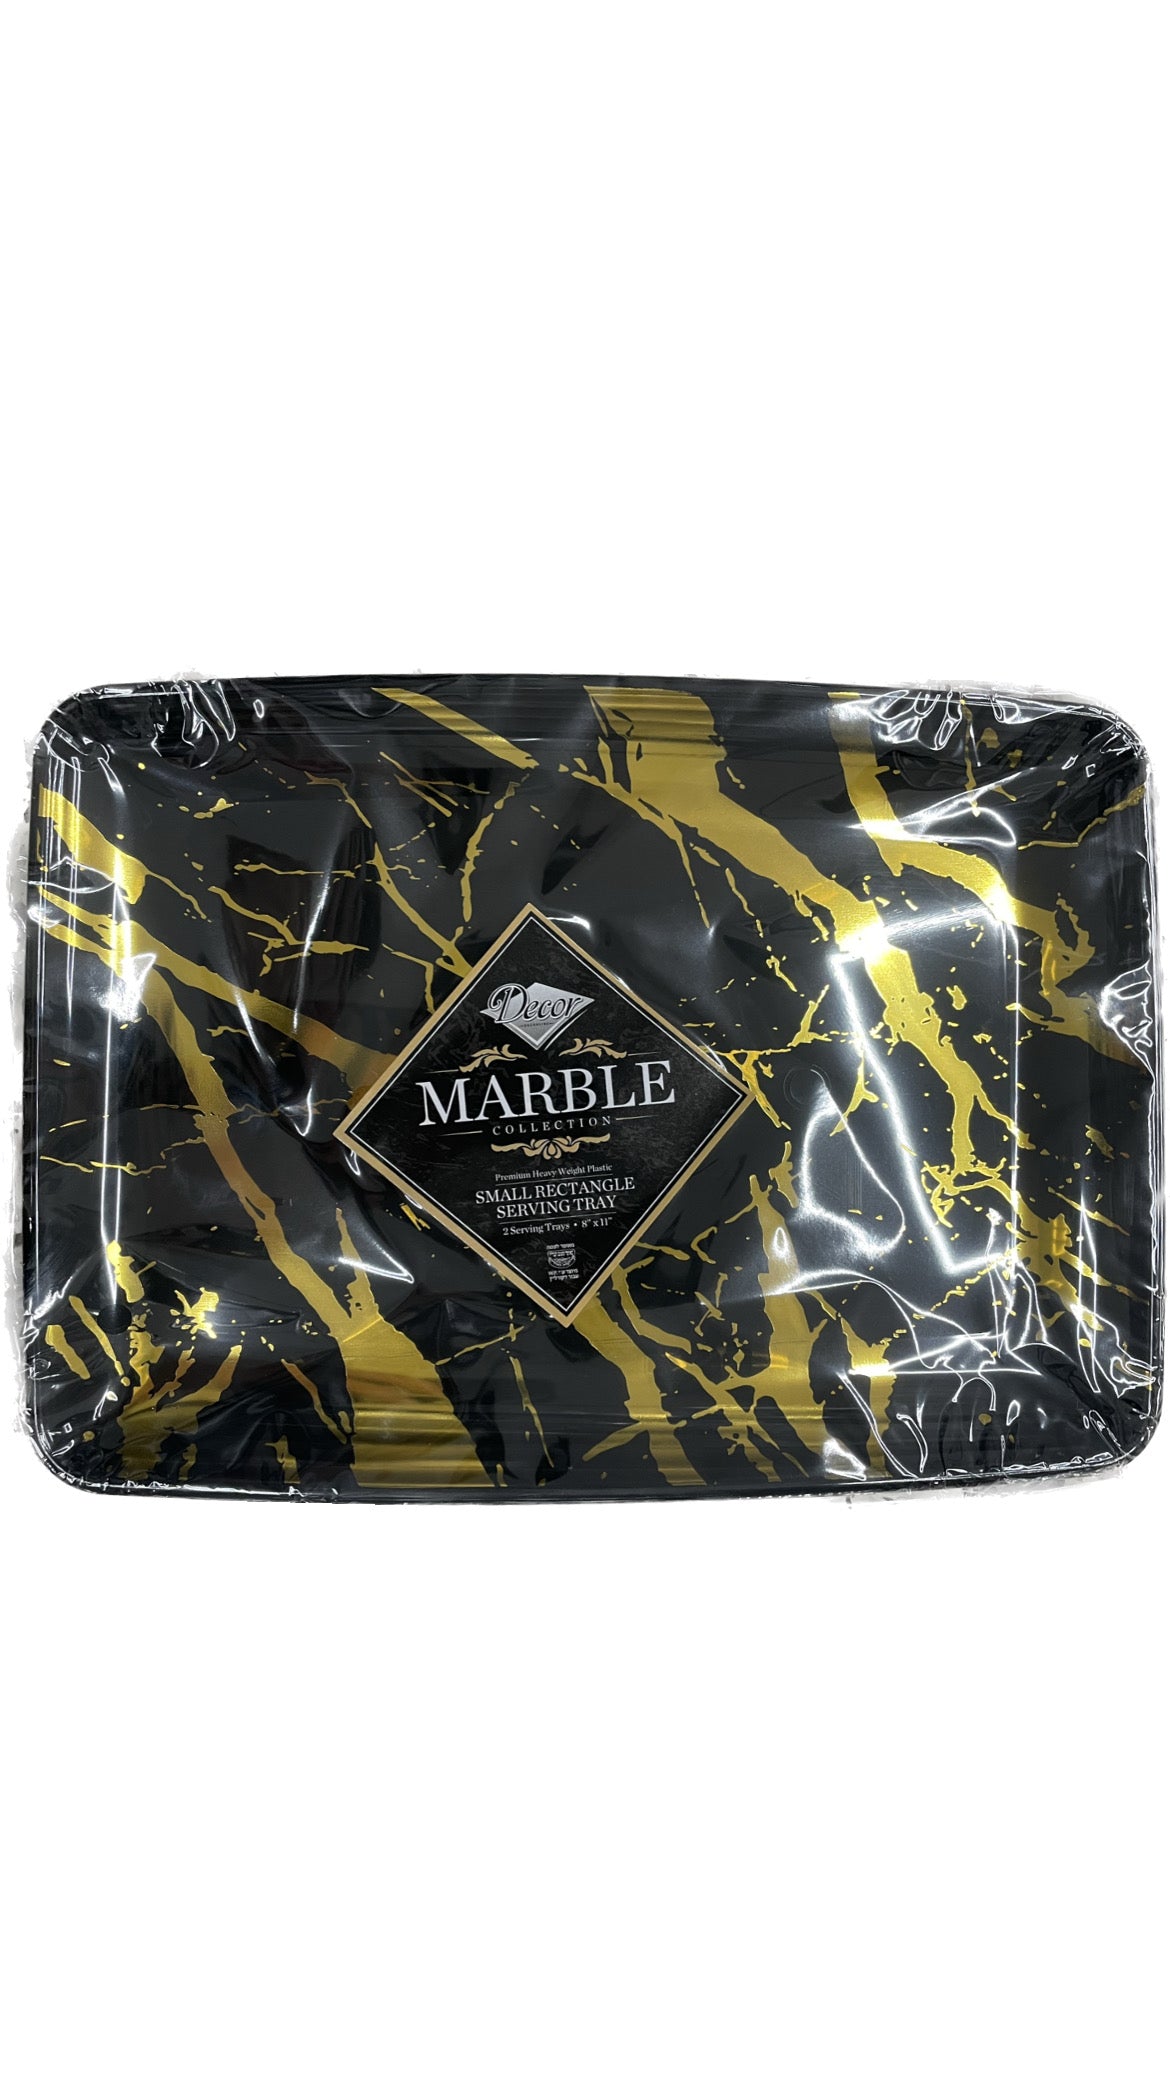 Marble Collection Small Rectangle Serving Tray - Black & Gold (2ct) - Set With Style